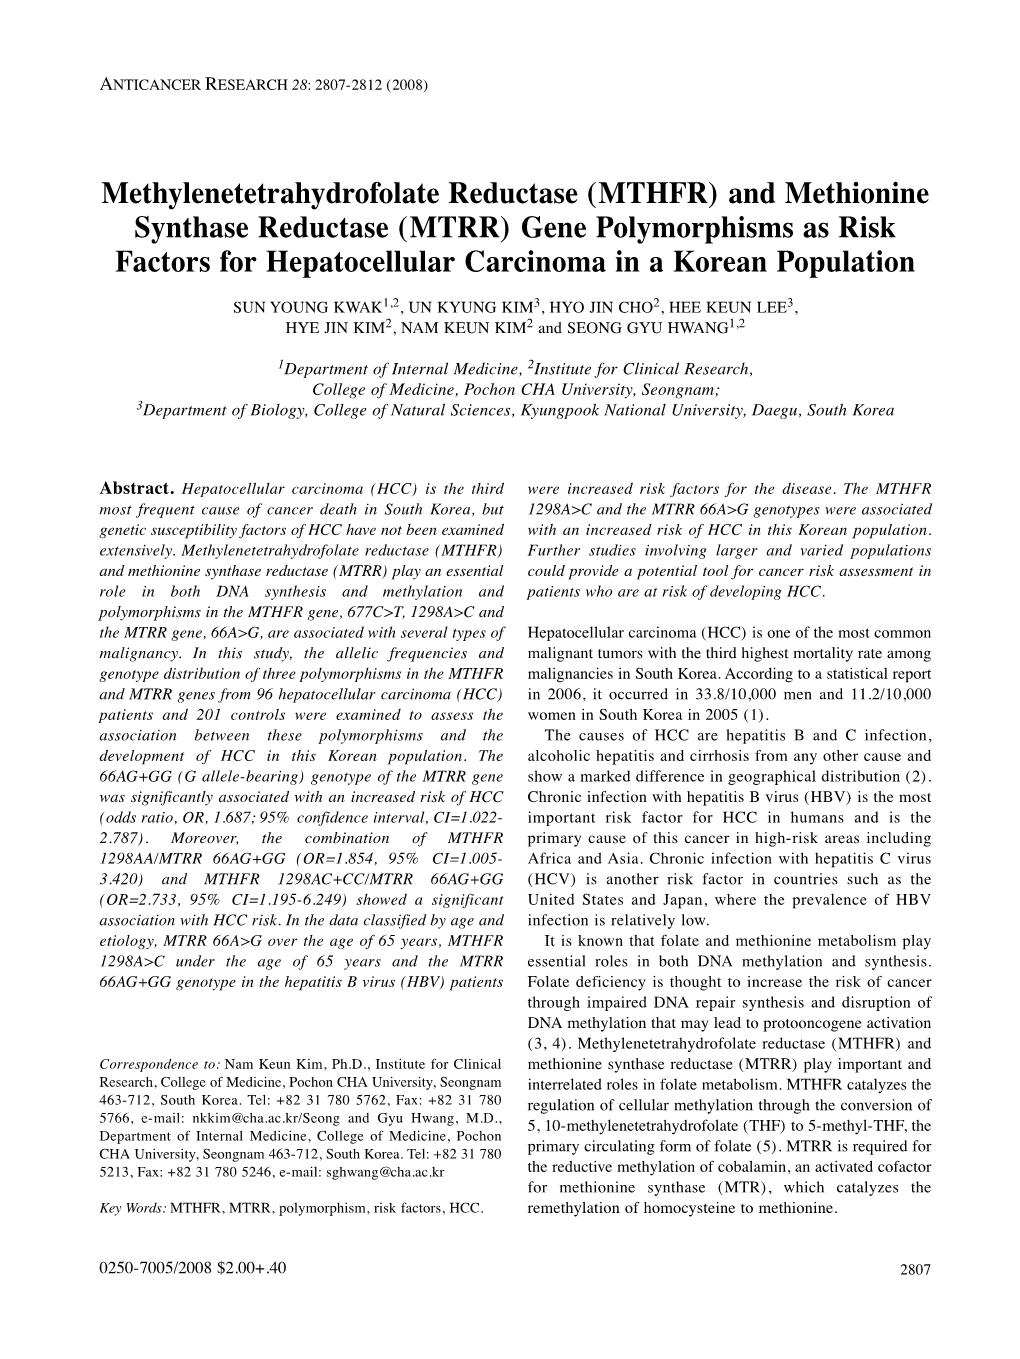 MTHFR) and Methionine Synthase Reductase (MTRR